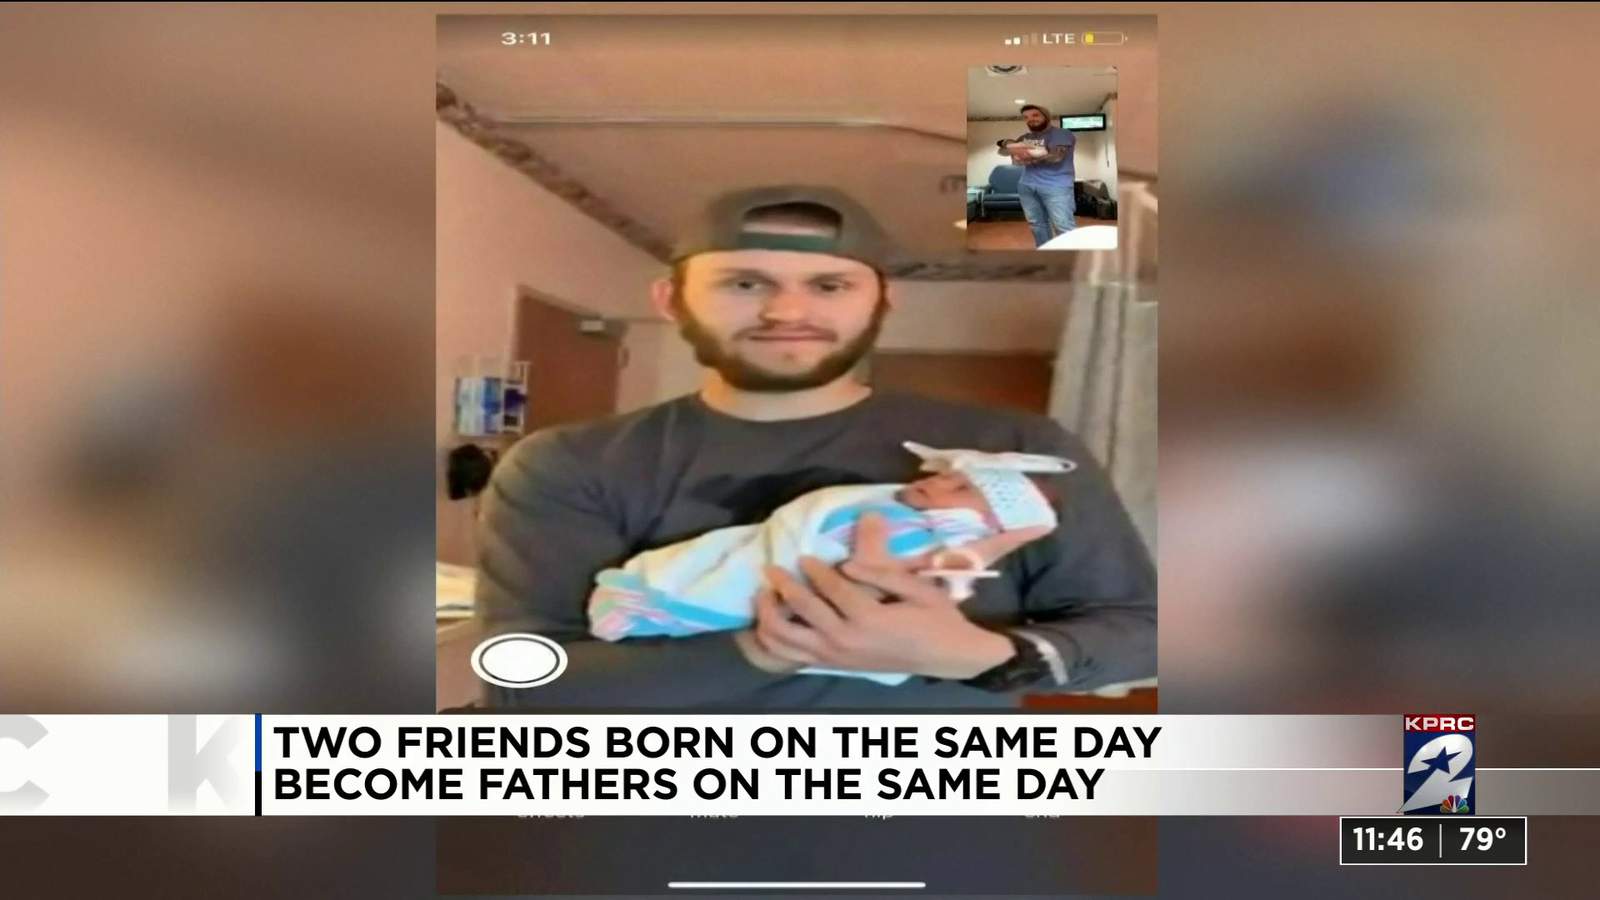 One Good Thing: Two friends born on the same day become fathers on the same day